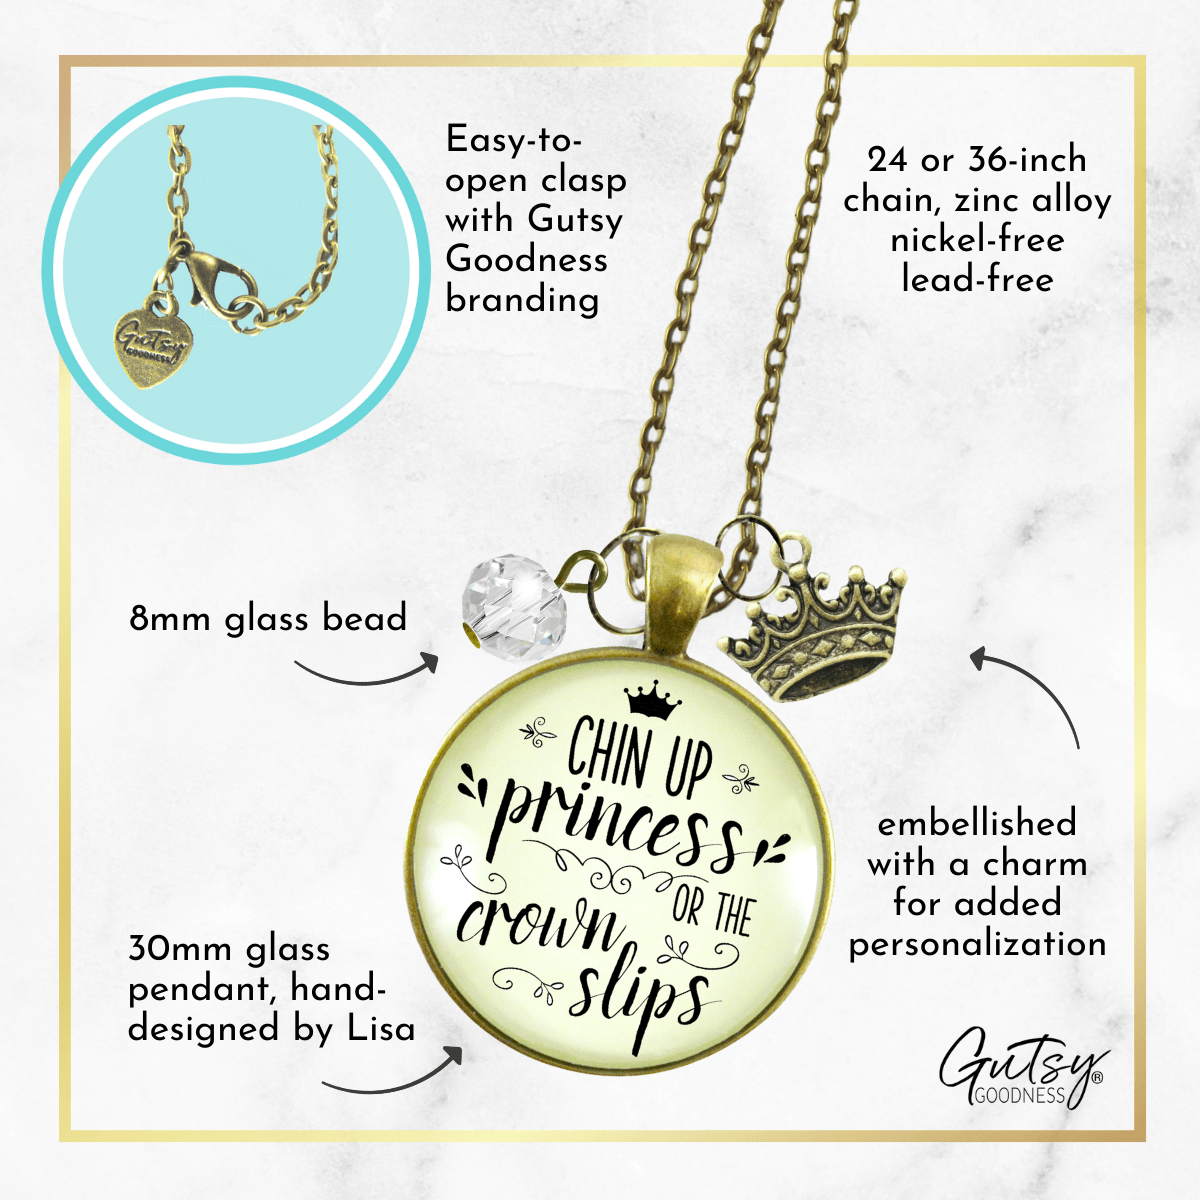 Chin Up Princess Necklace Quote Jewelry Crown Slips Inspired Life Warrior Gift - Gutsy Goodness Handmade Jewelry;Chin Up Princess Necklace Quote Jewelry Crown Slips Inspired Life Warrior Gift - Gutsy Goodness Handmade Jewelry Gifts